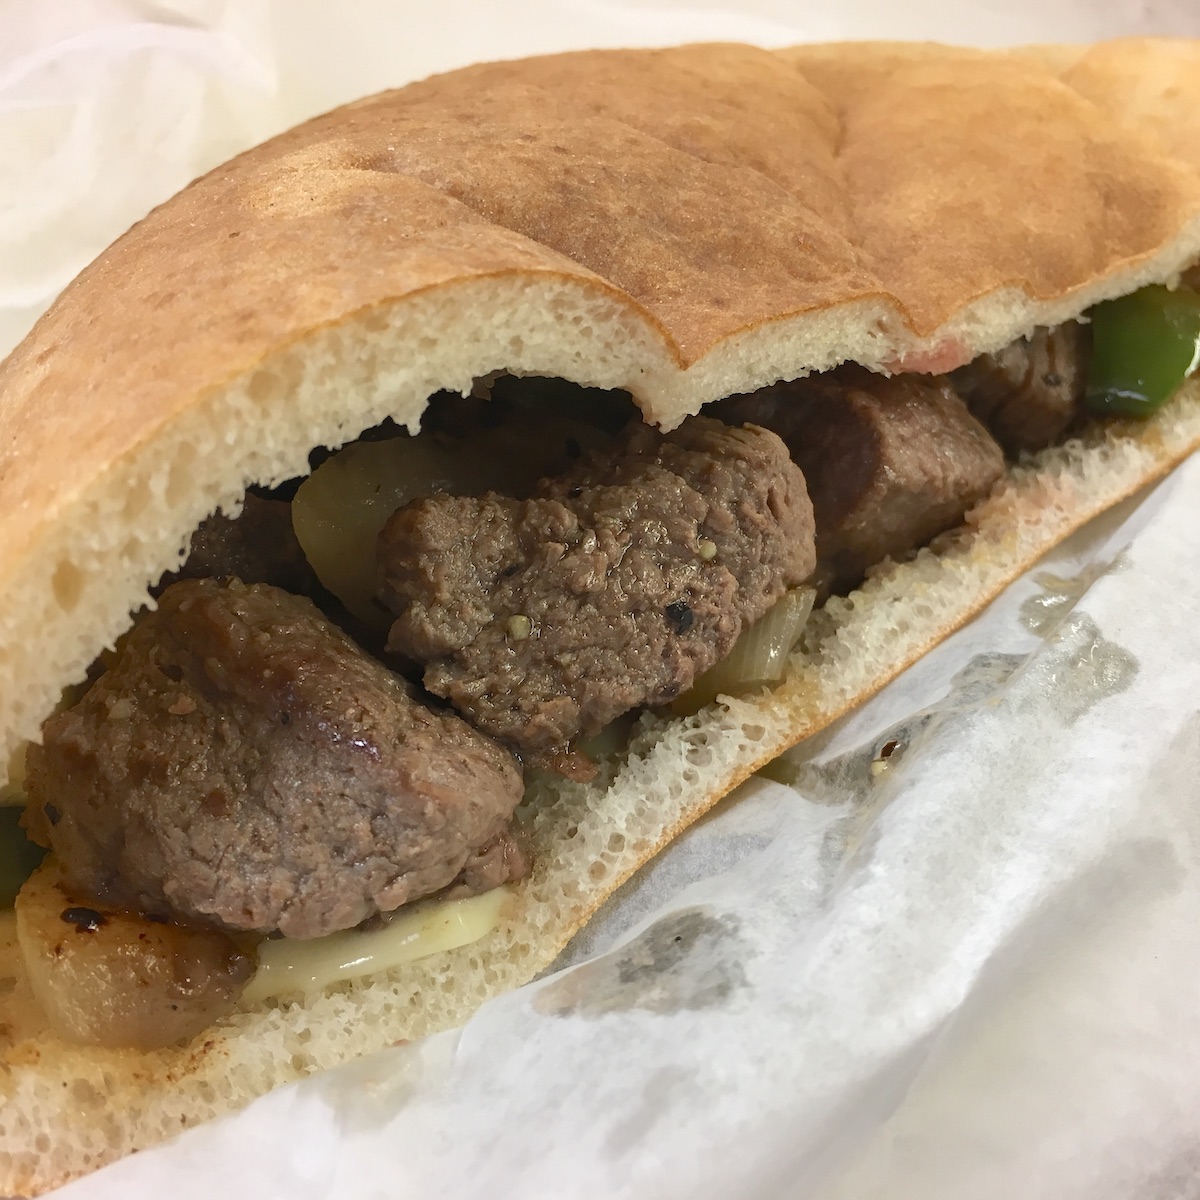 Steak-in-a-Sack from Pinegrove Market and Deli in Jacksonville, Florida